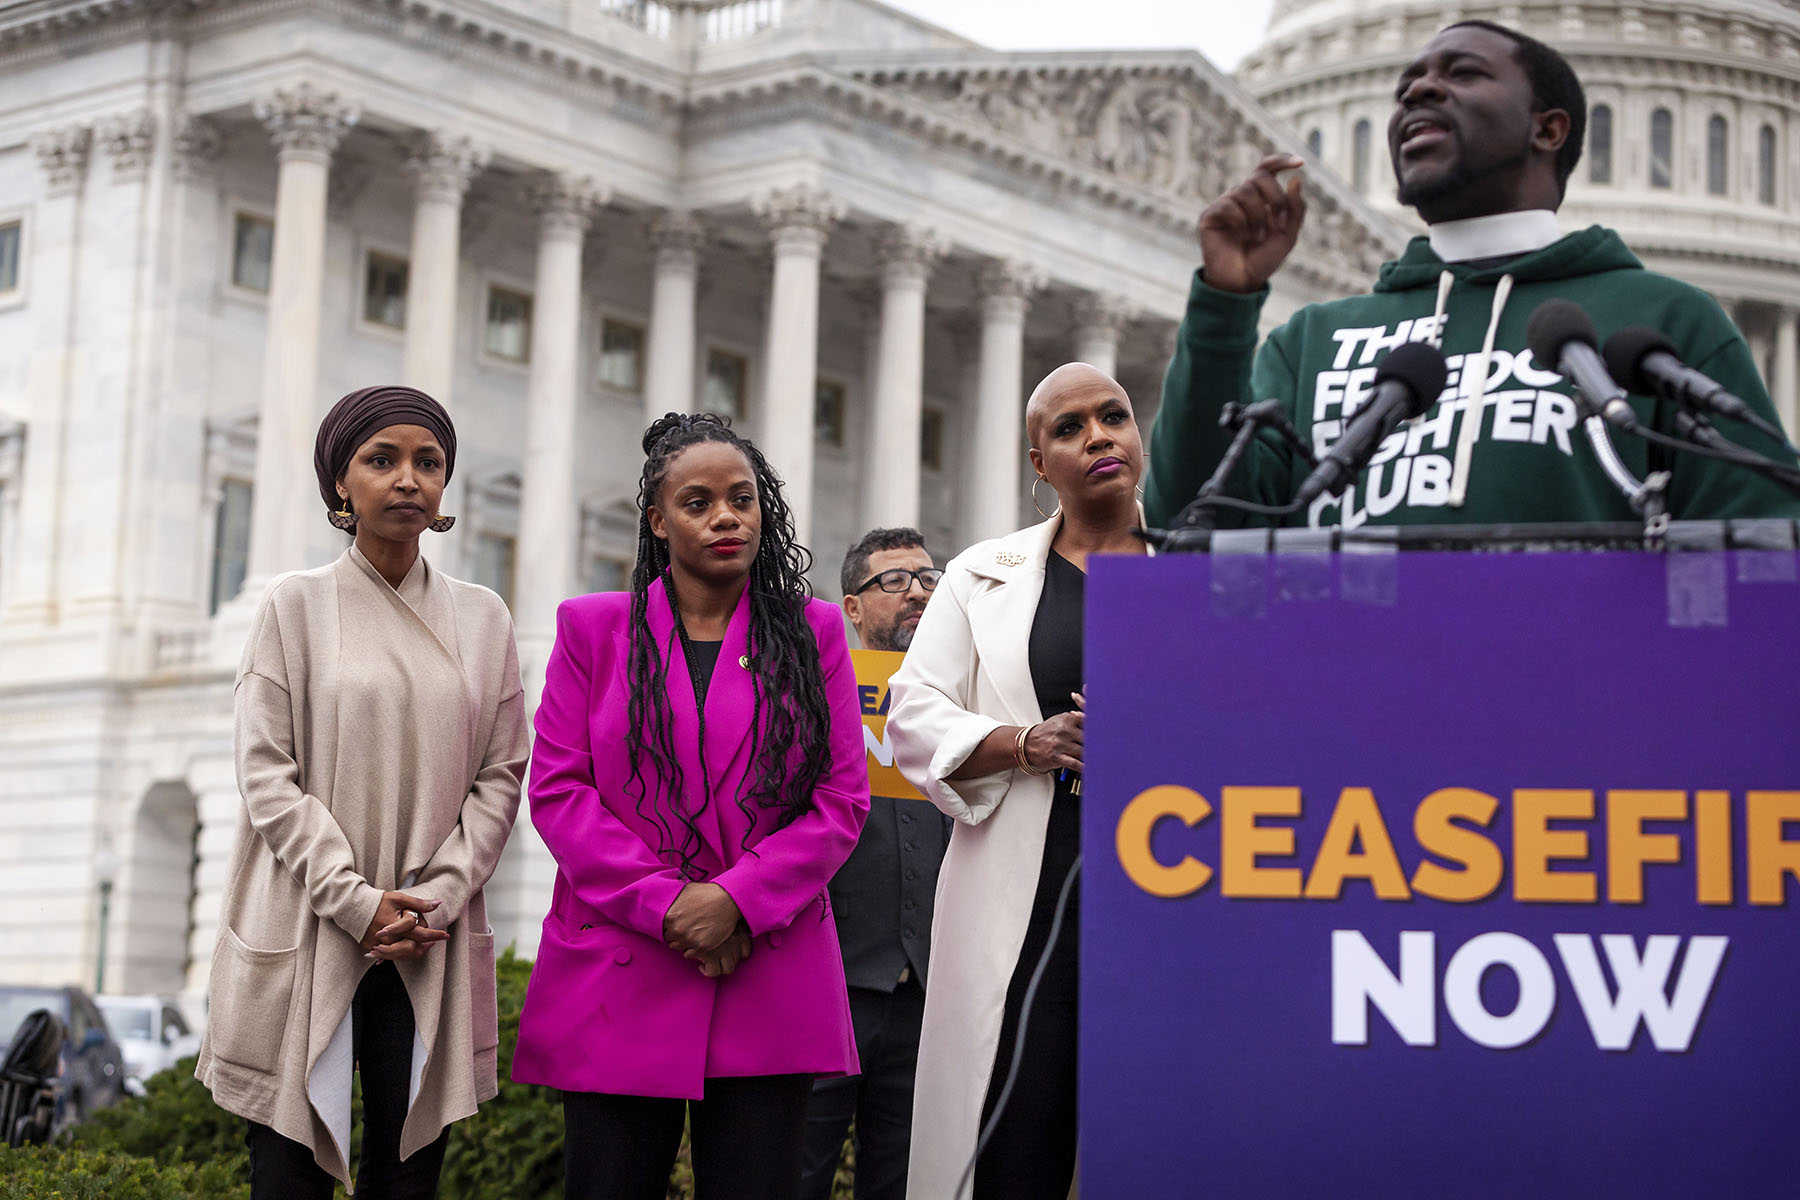 Rep. Ilhan Omar, Summer Lee, and Ayanna Pressley participate in a press conference in front of the U.S. Capitol.